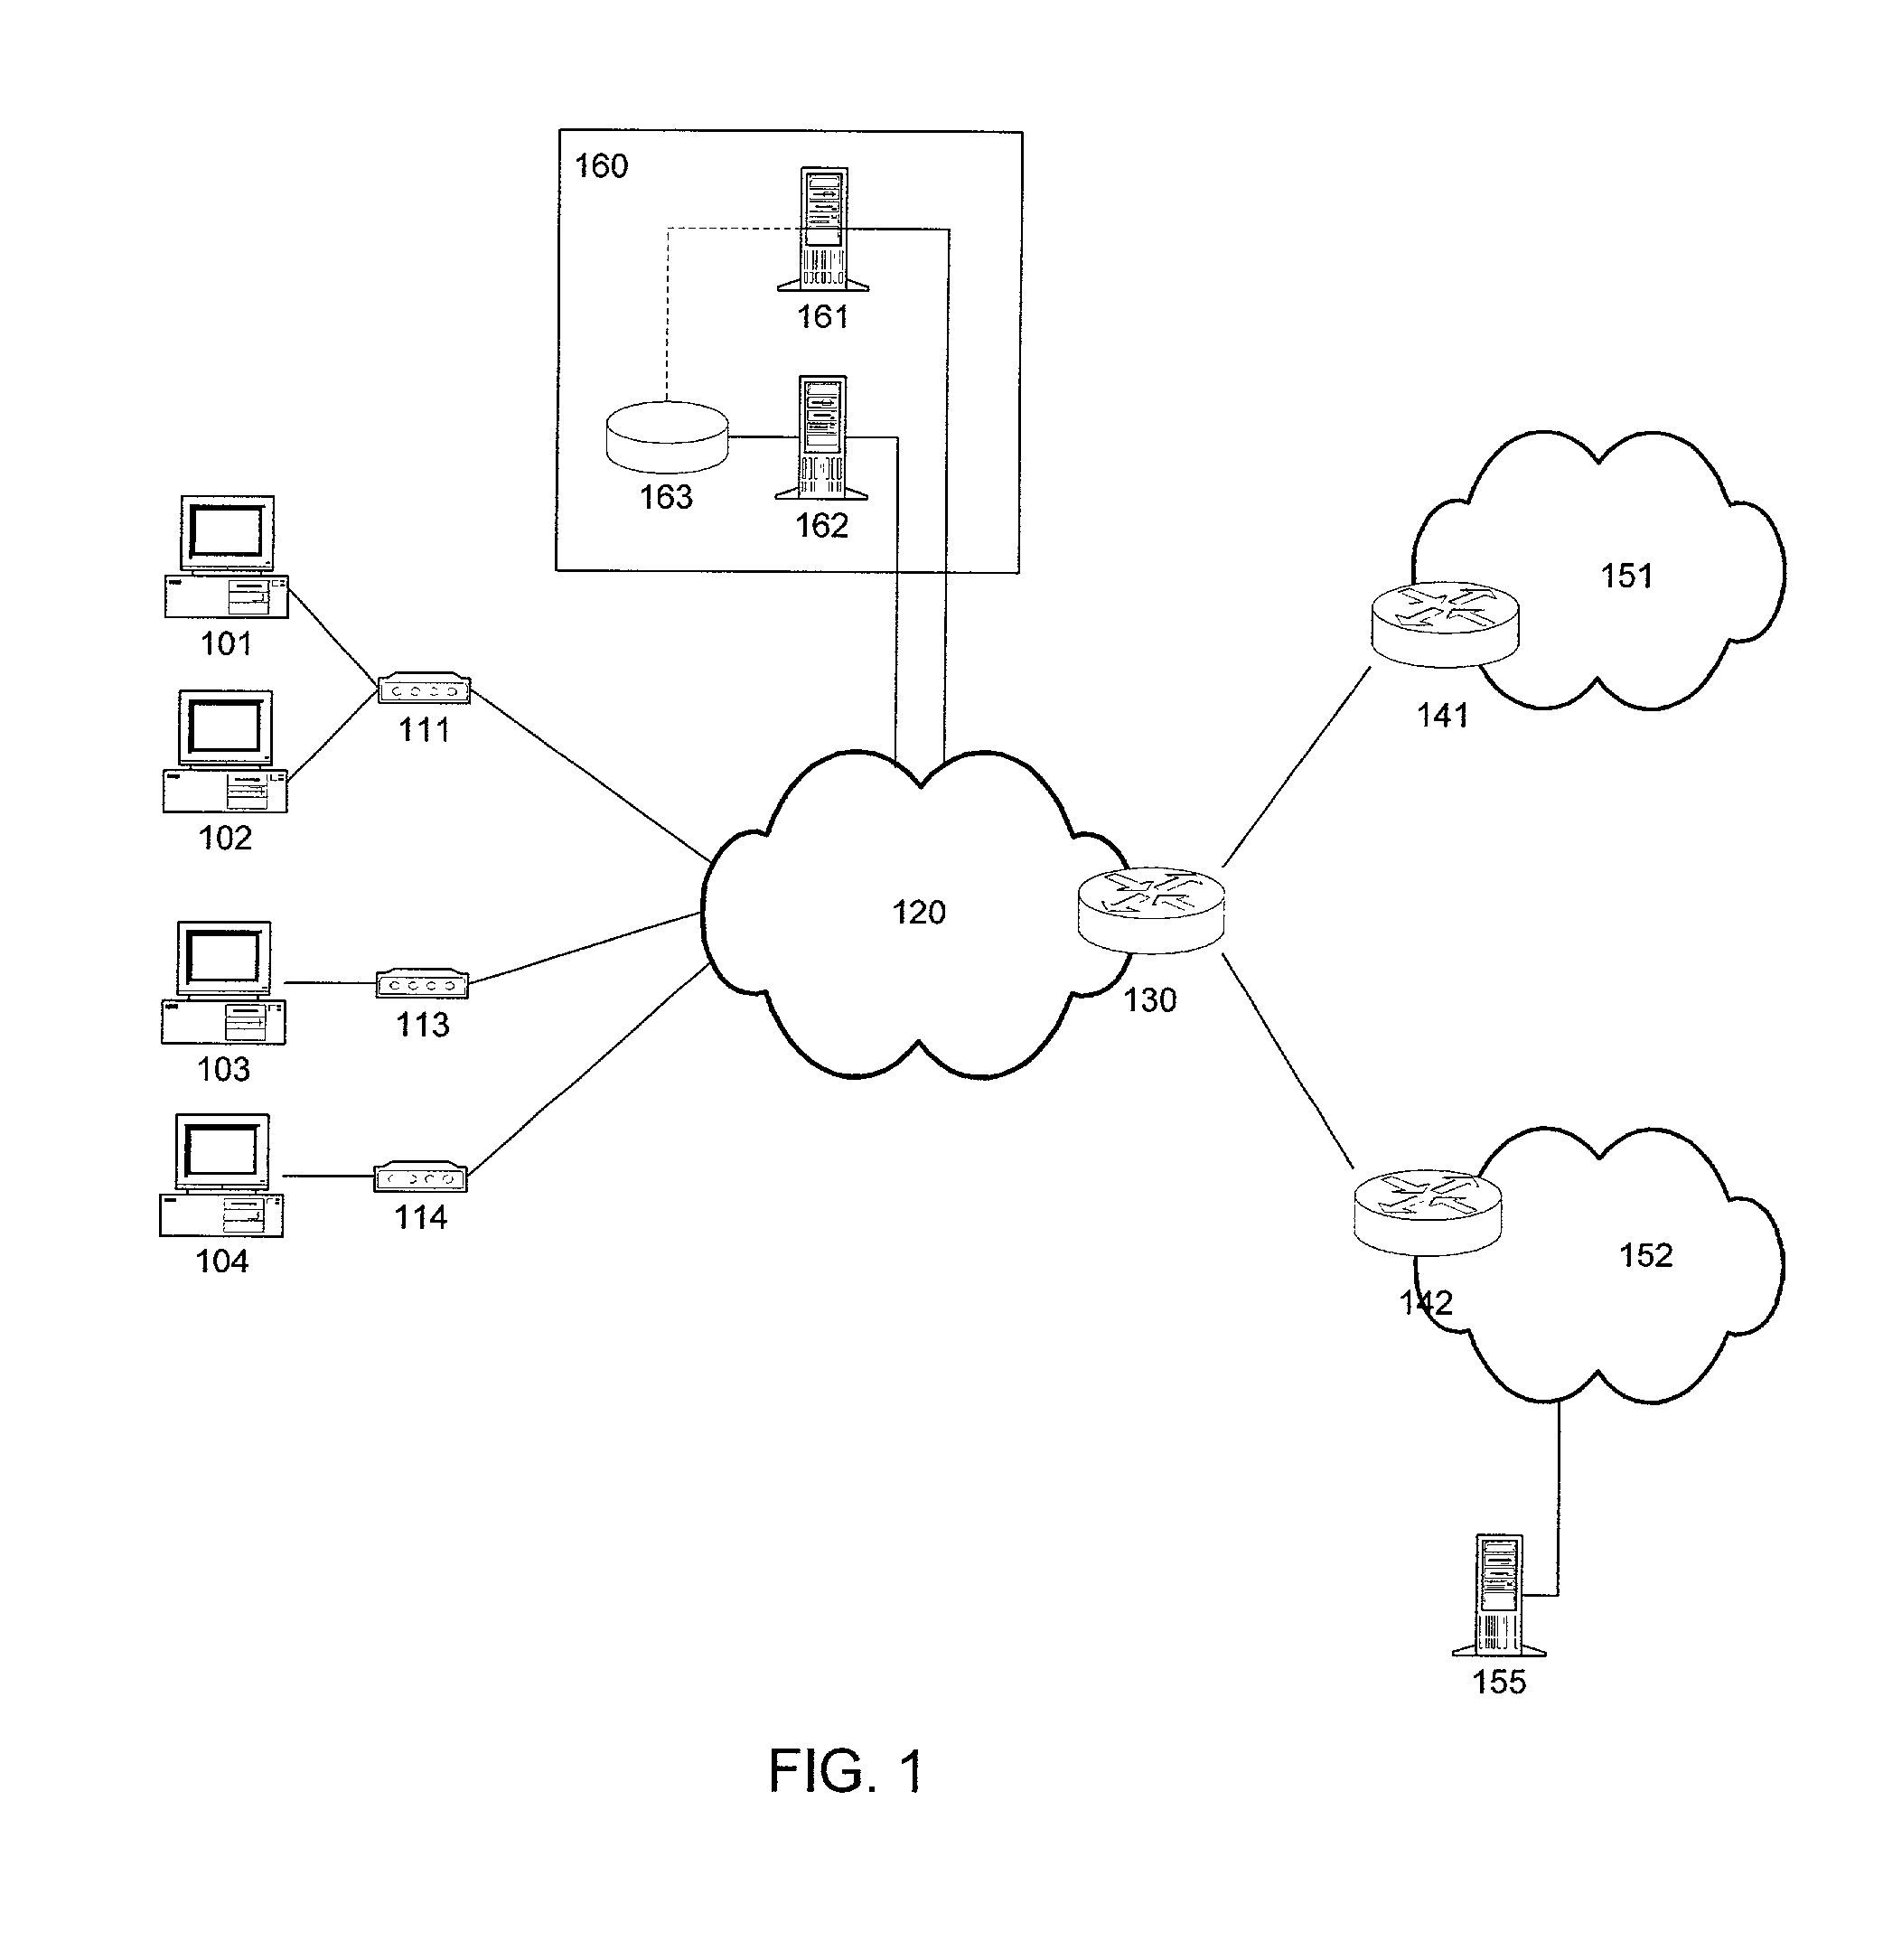 Service selection in a shared access network using policy routing